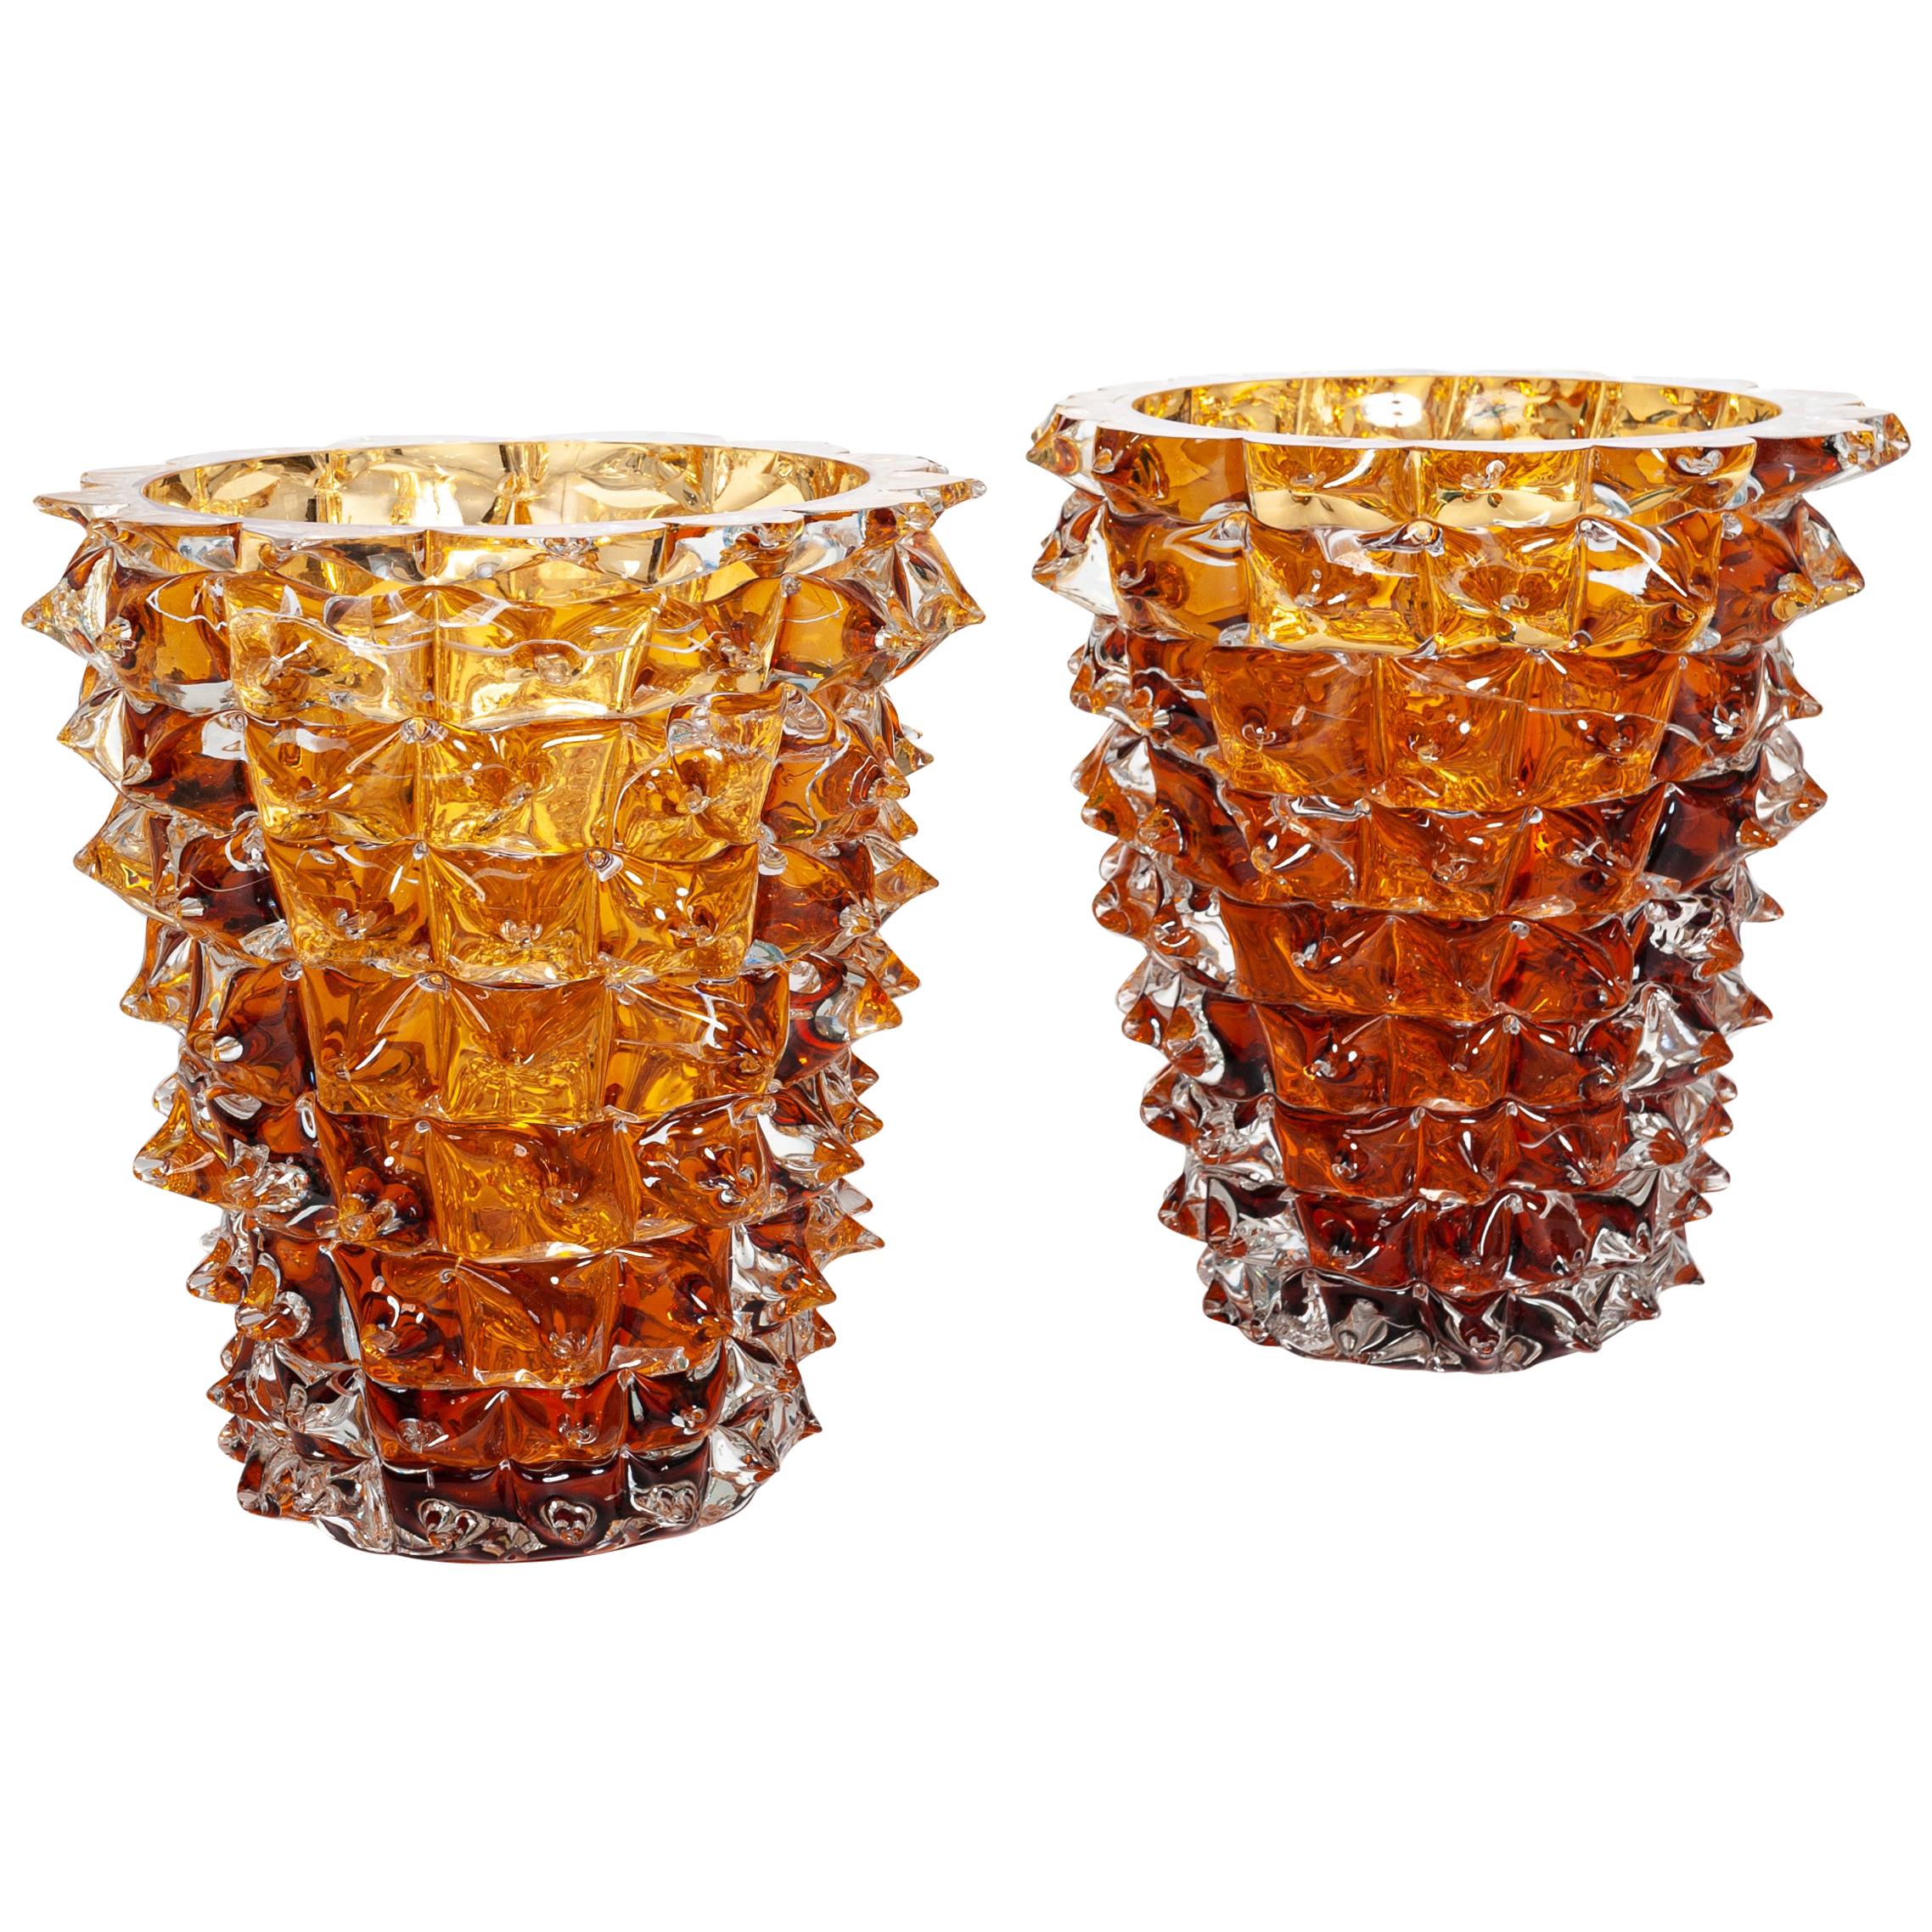 Pair of Amber Colored Vases in Murano Glass with Spikes Decor, Signed Costantini